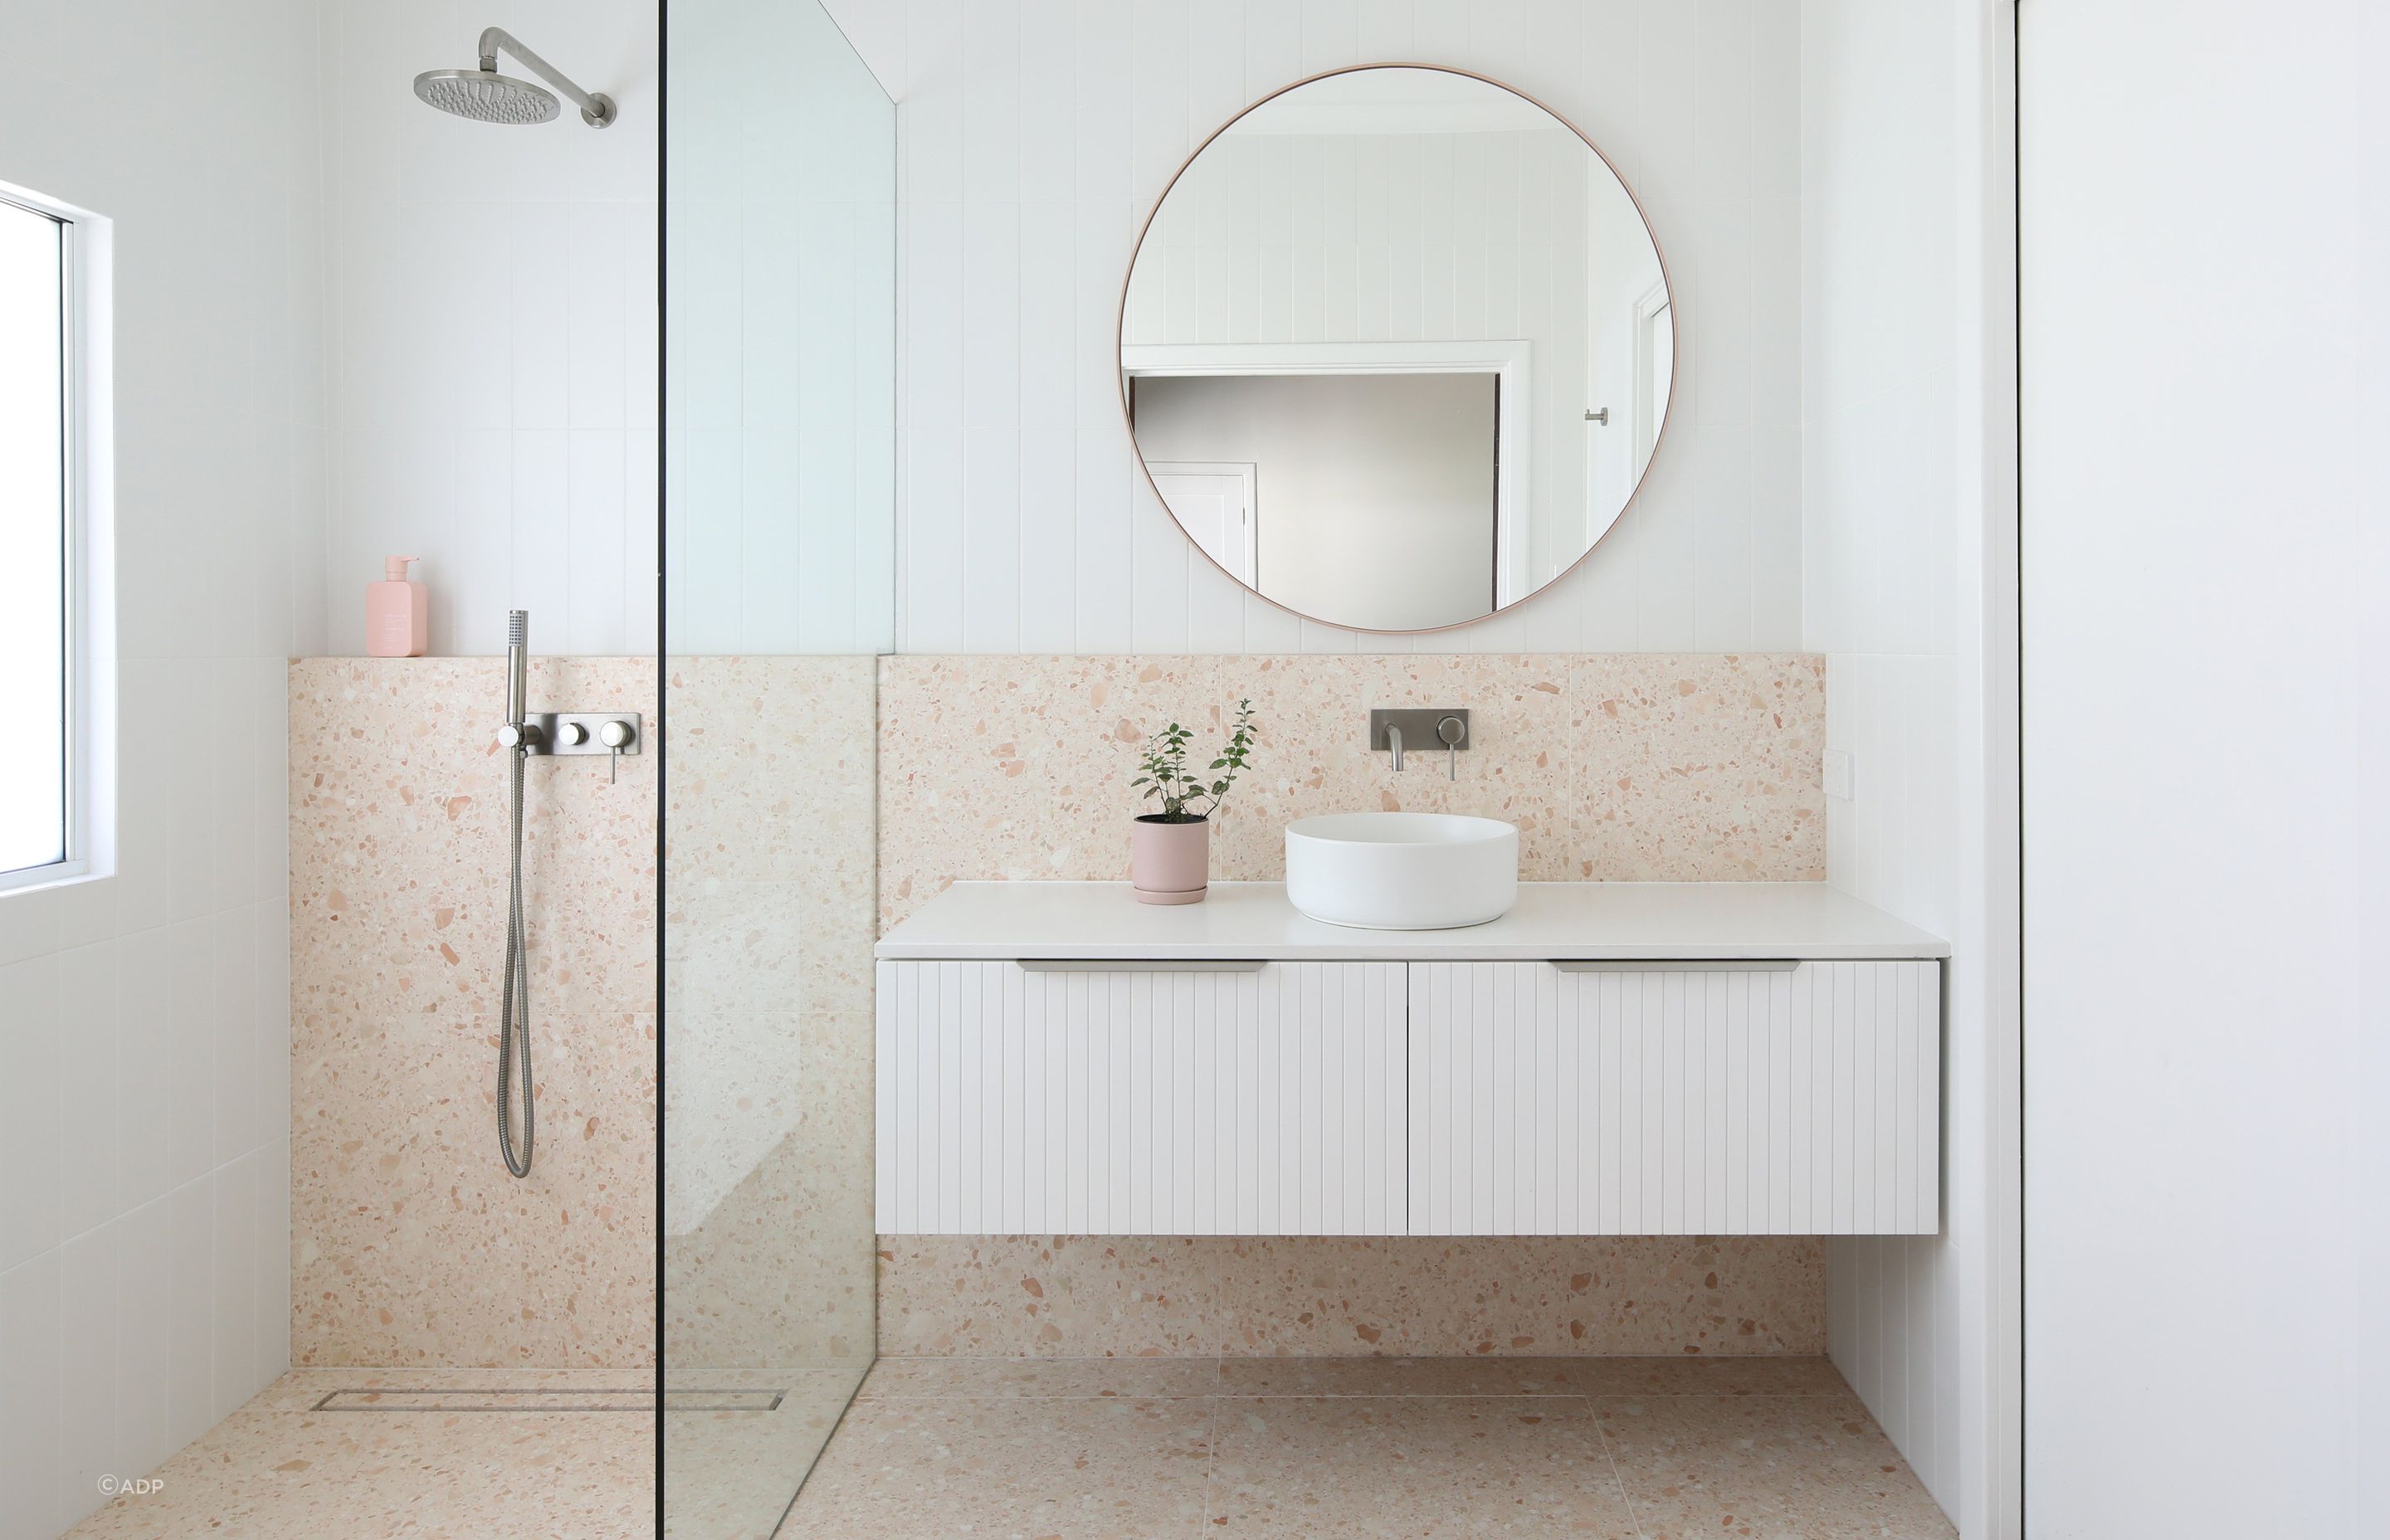 Floating bathroom vanities can fit snugly into a bathroom